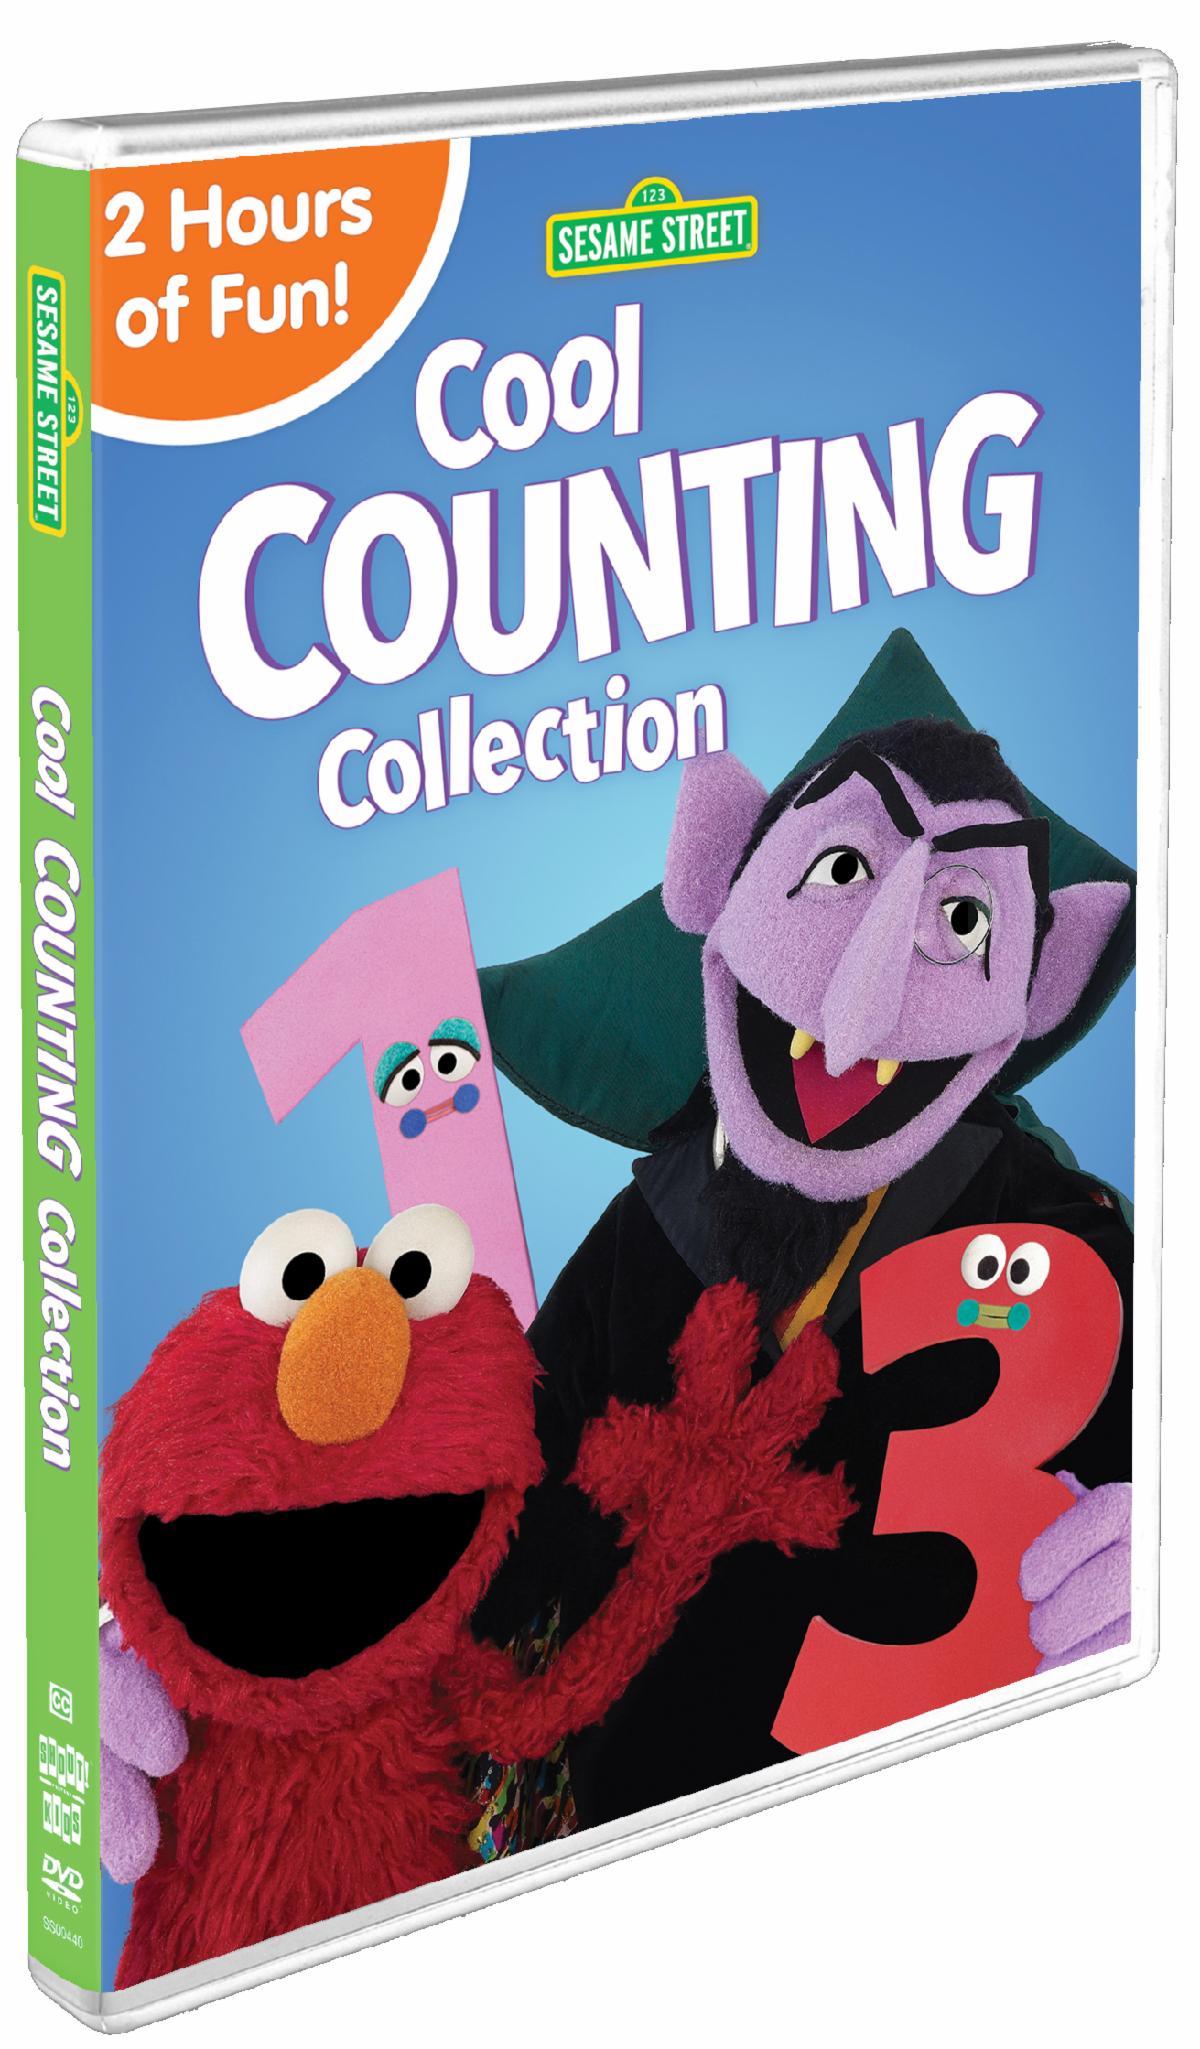 Sesame Street: Cool Counting Collection Giveaway | Military Press